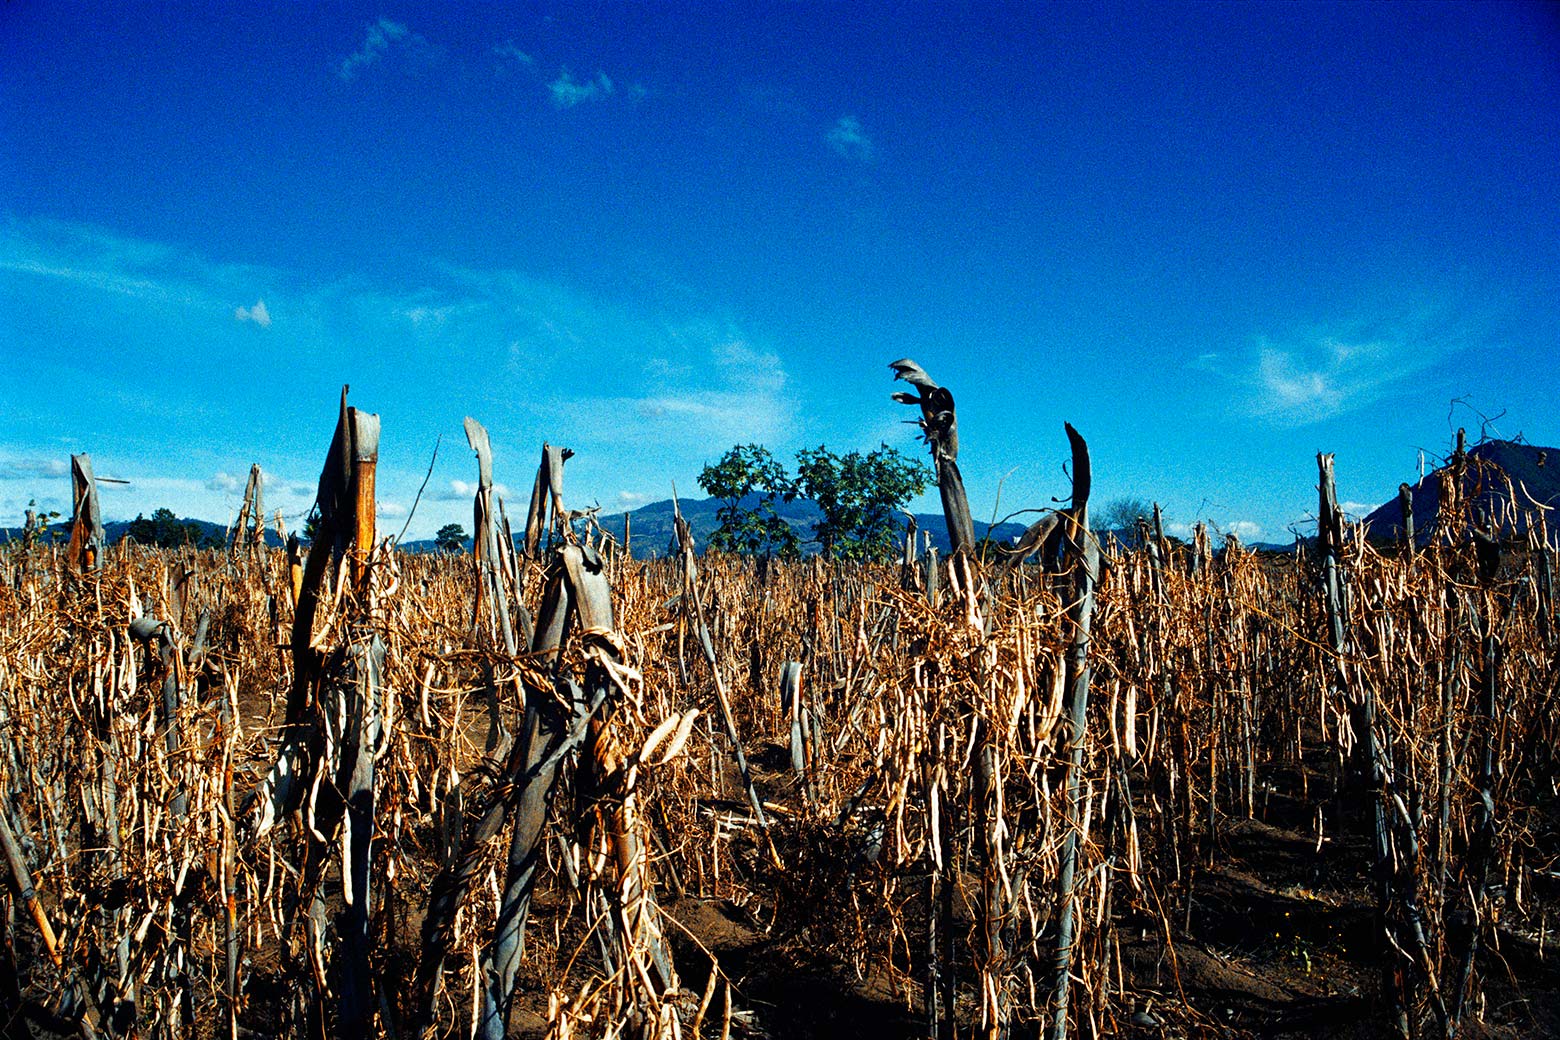 A view of a field of ruined crops